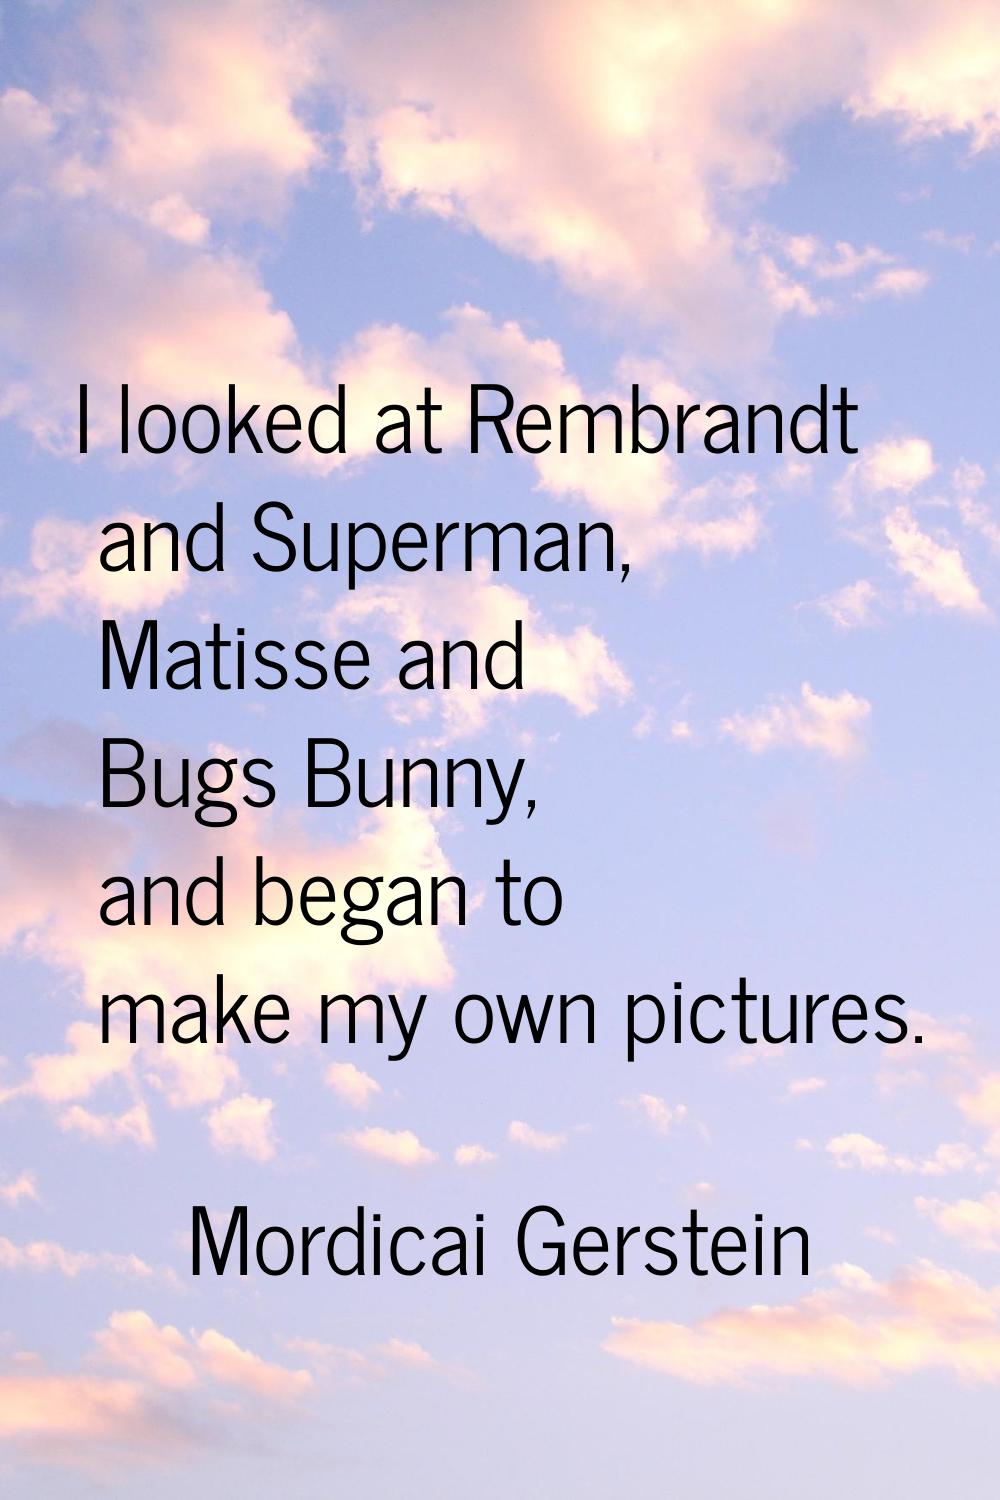 I looked at Rembrandt and Superman, Matisse and Bugs Bunny, and began to make my own pictures.